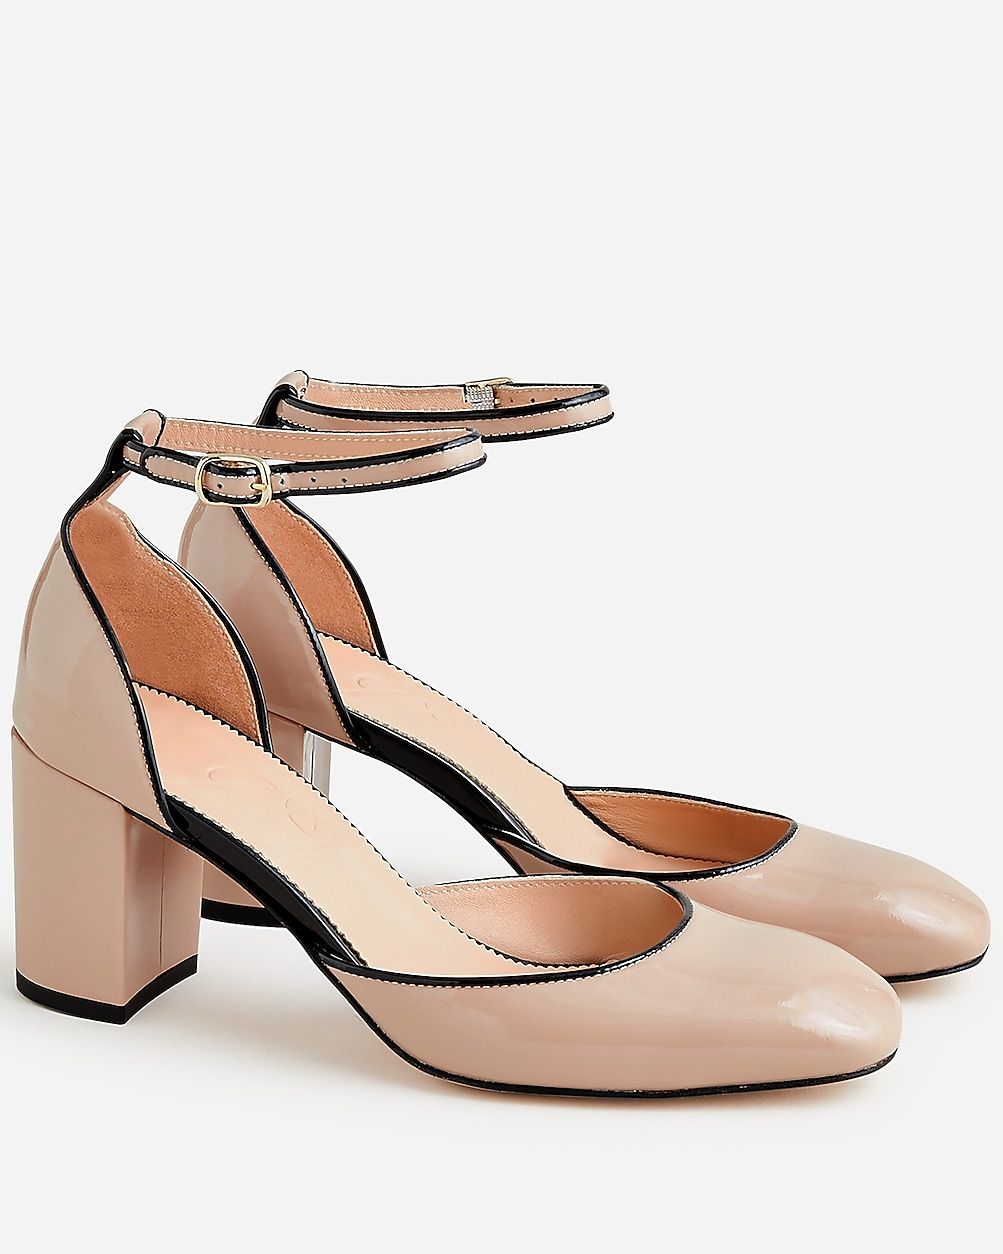 Maisie ankle-strap heels in Italian patent leather | J.Crew US